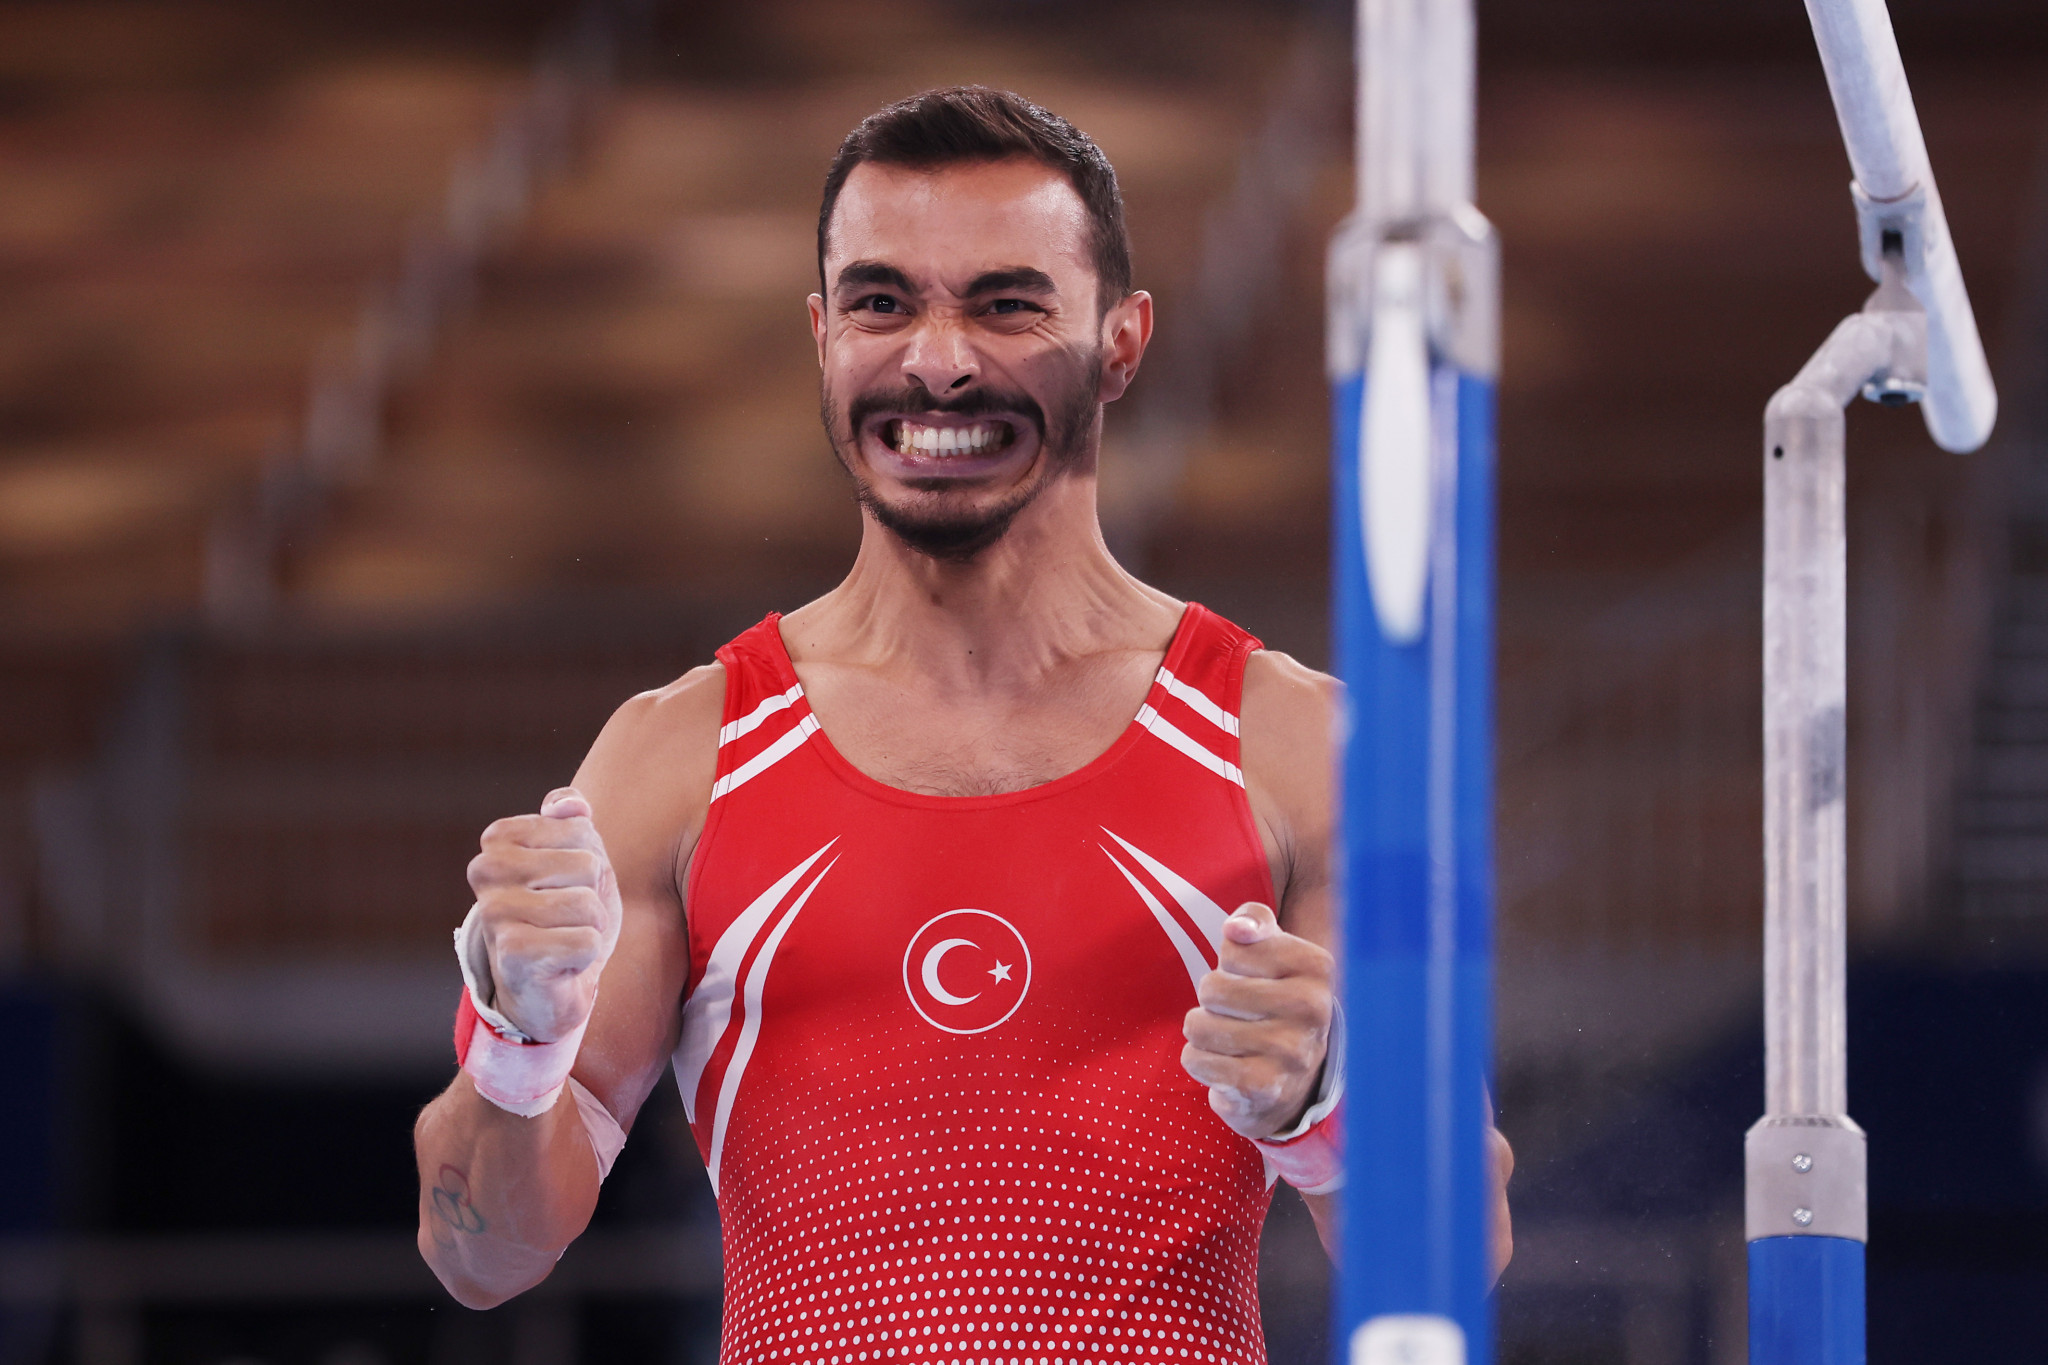 History-maker Arican targets more medals at FIG Artistic Gymnastics World Challenge Cup in Osijek